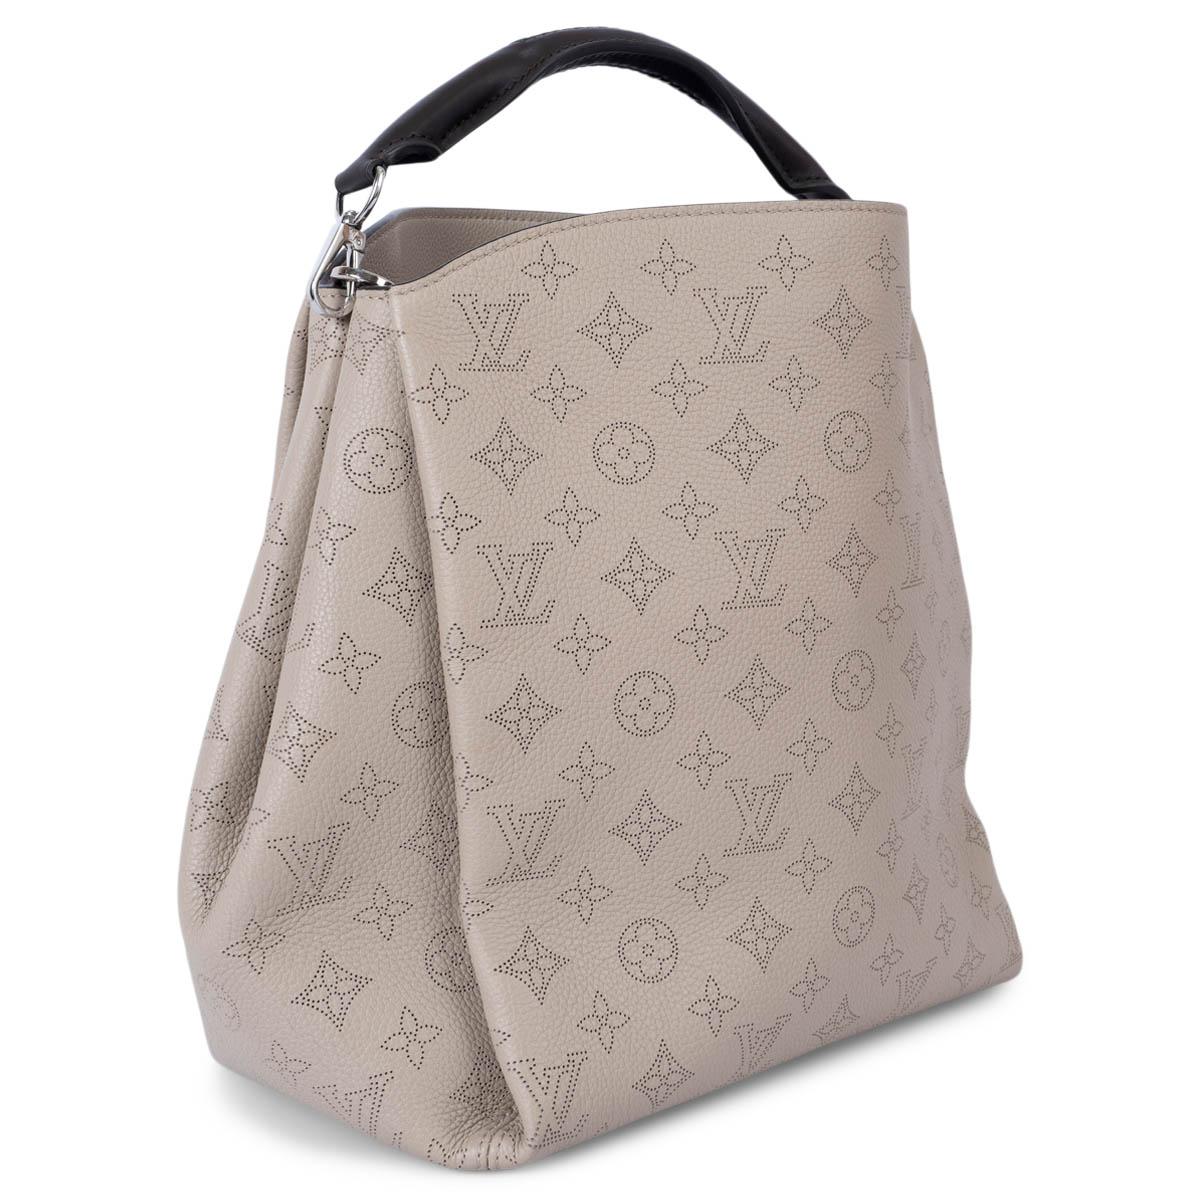 100% authentic Louis Vuitton Babylone PM hobo monogram in galet taupe Mahina leather. The design features a espresso brown rolled and braided leather handle and is lined in dark brown alcantara with one zipper pocket against the back and two open